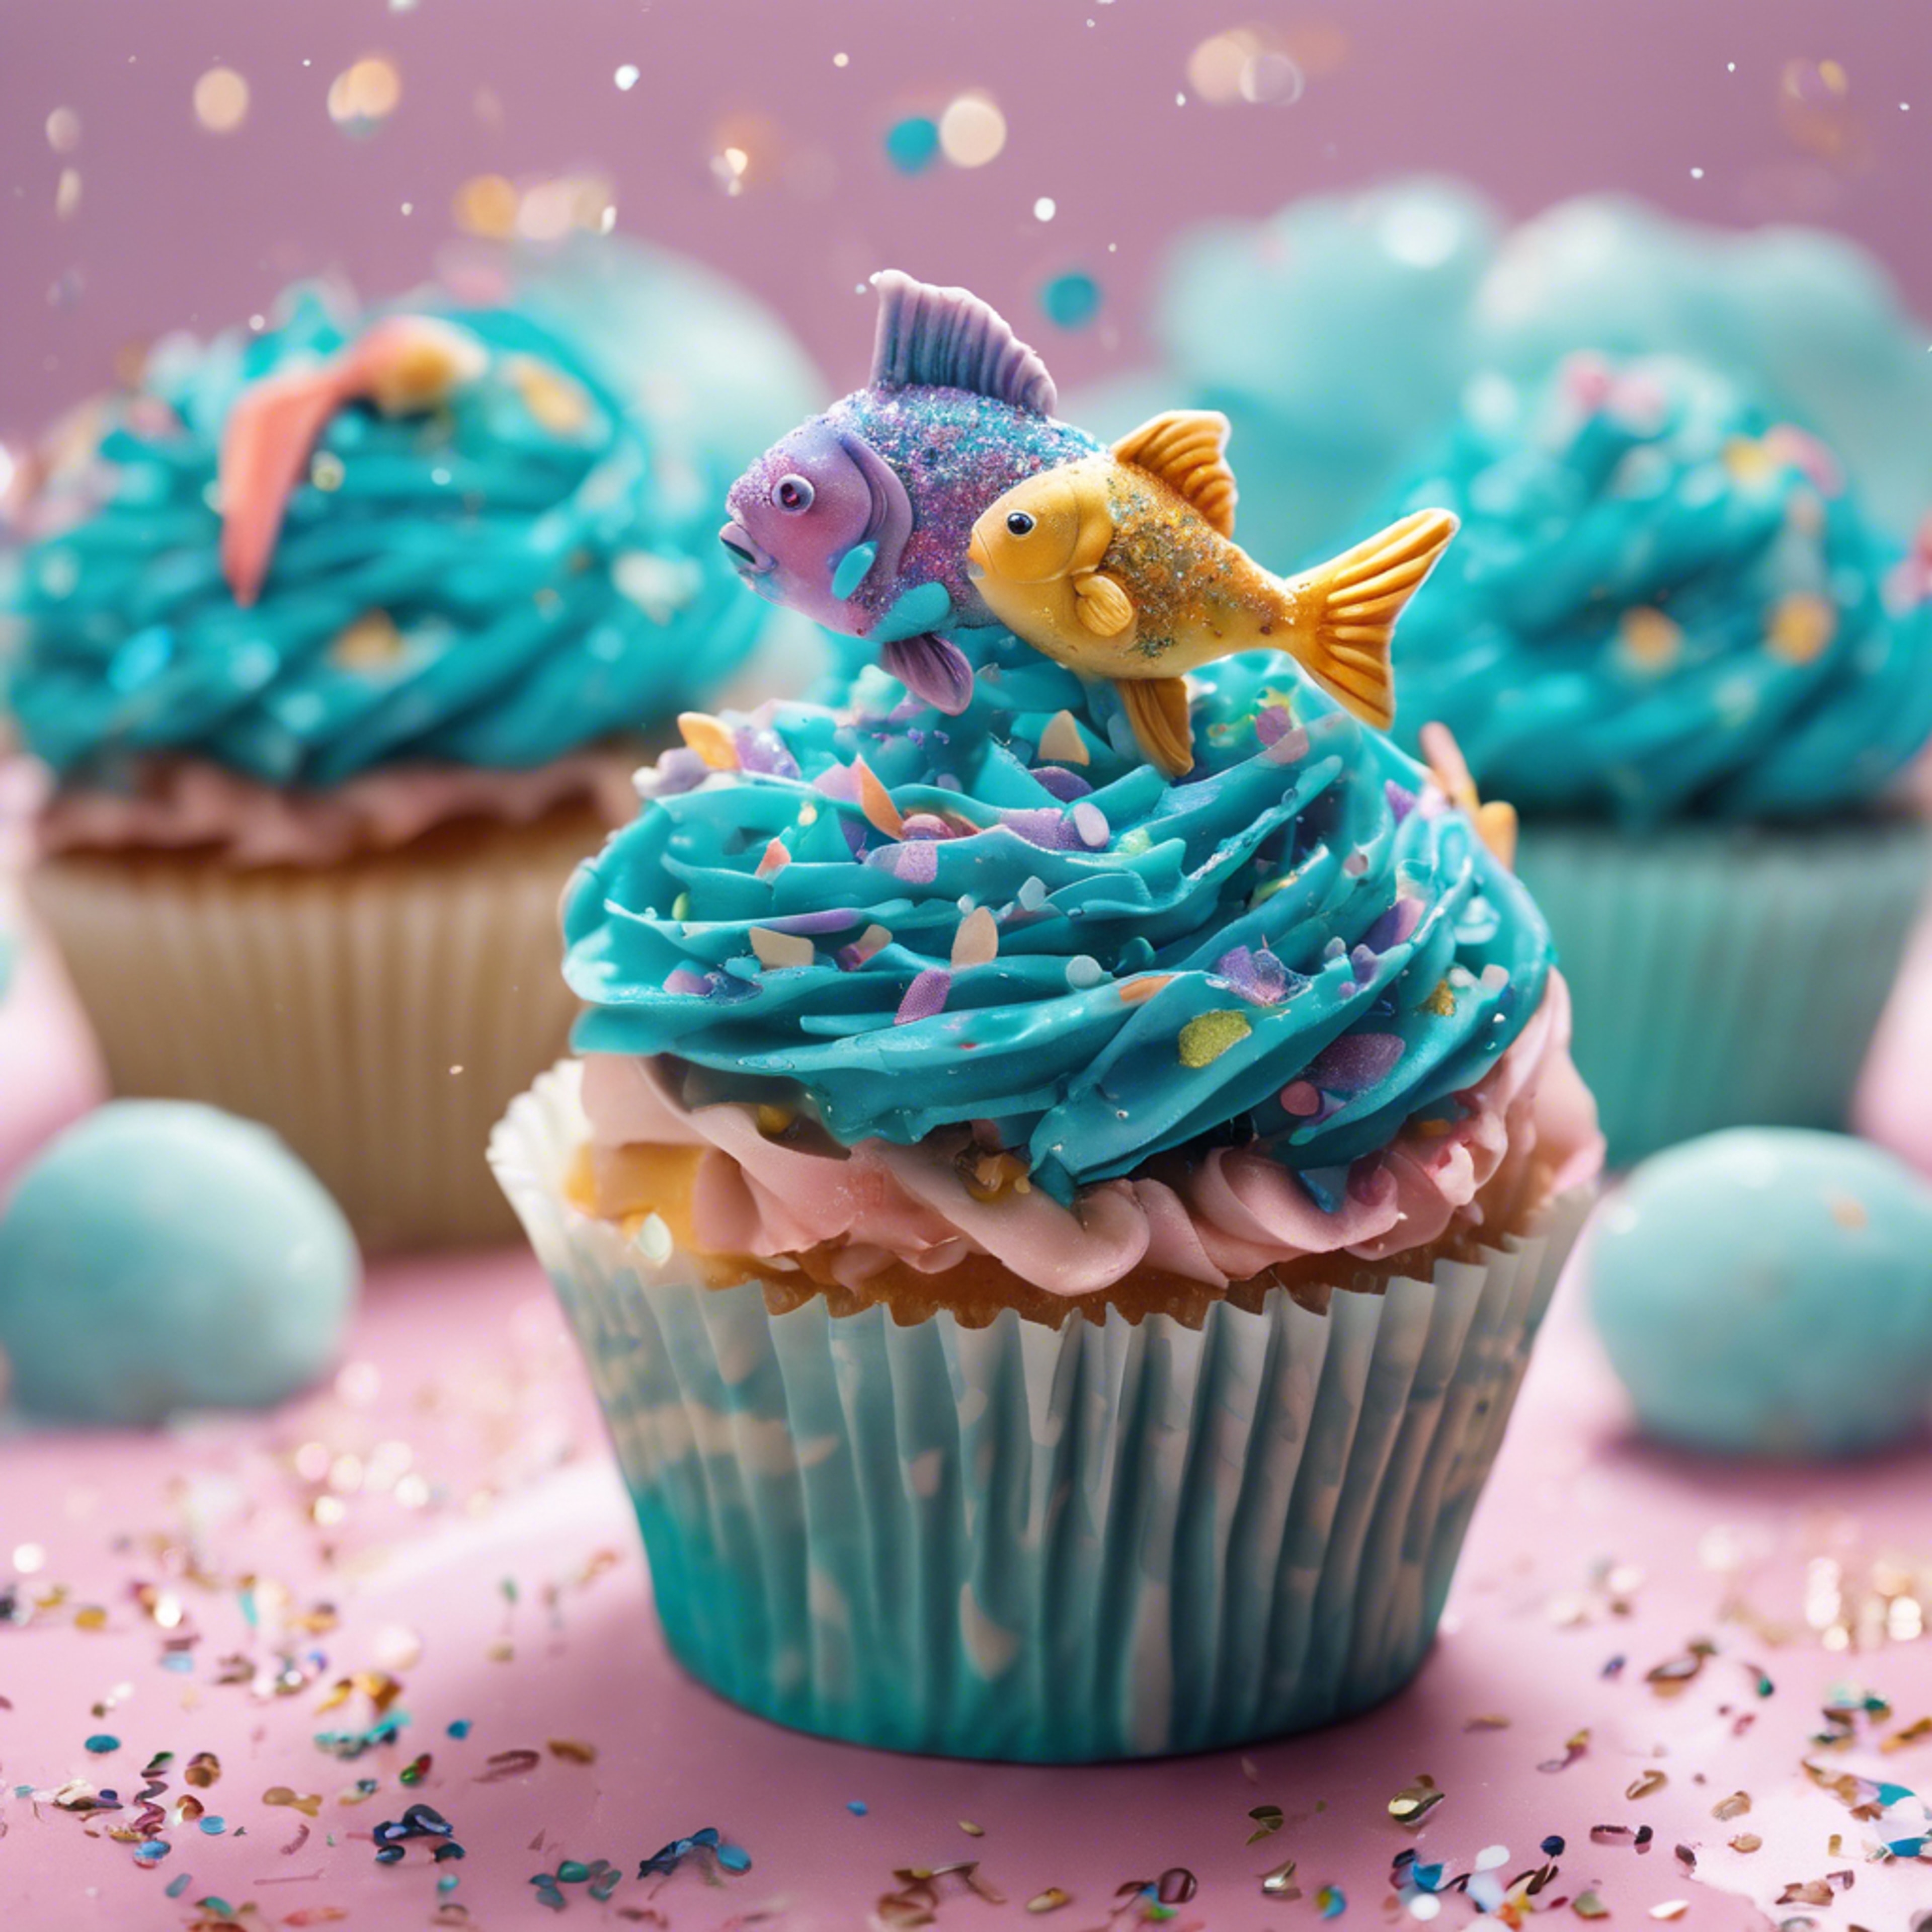 A whimsical Pisces-themed cupcake, with decorative icing representing two cute fish swimming in a sea of sprinkles. Валлпапер[694d5145c111483cb550]